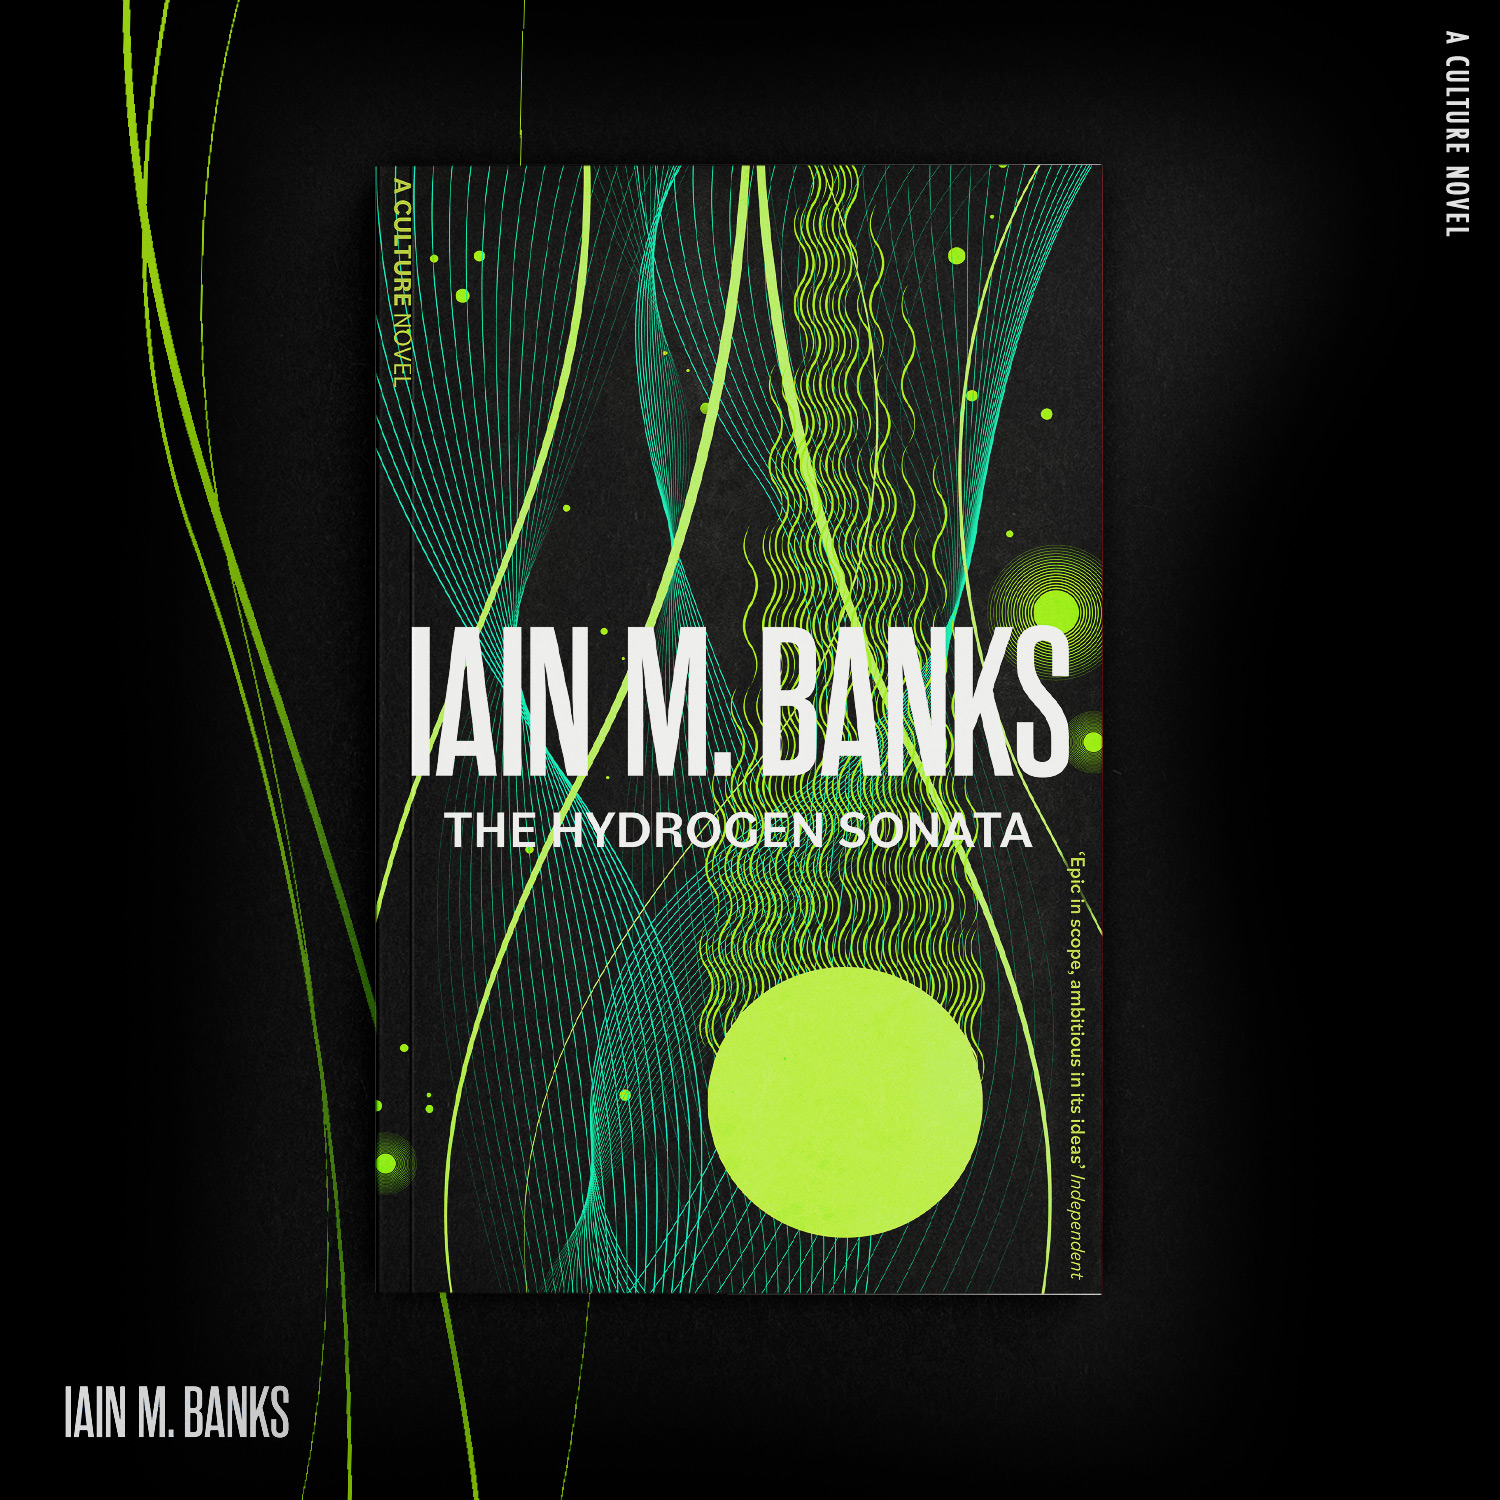 Iain m banks culture series 10 books collection set by Iain M. Banks